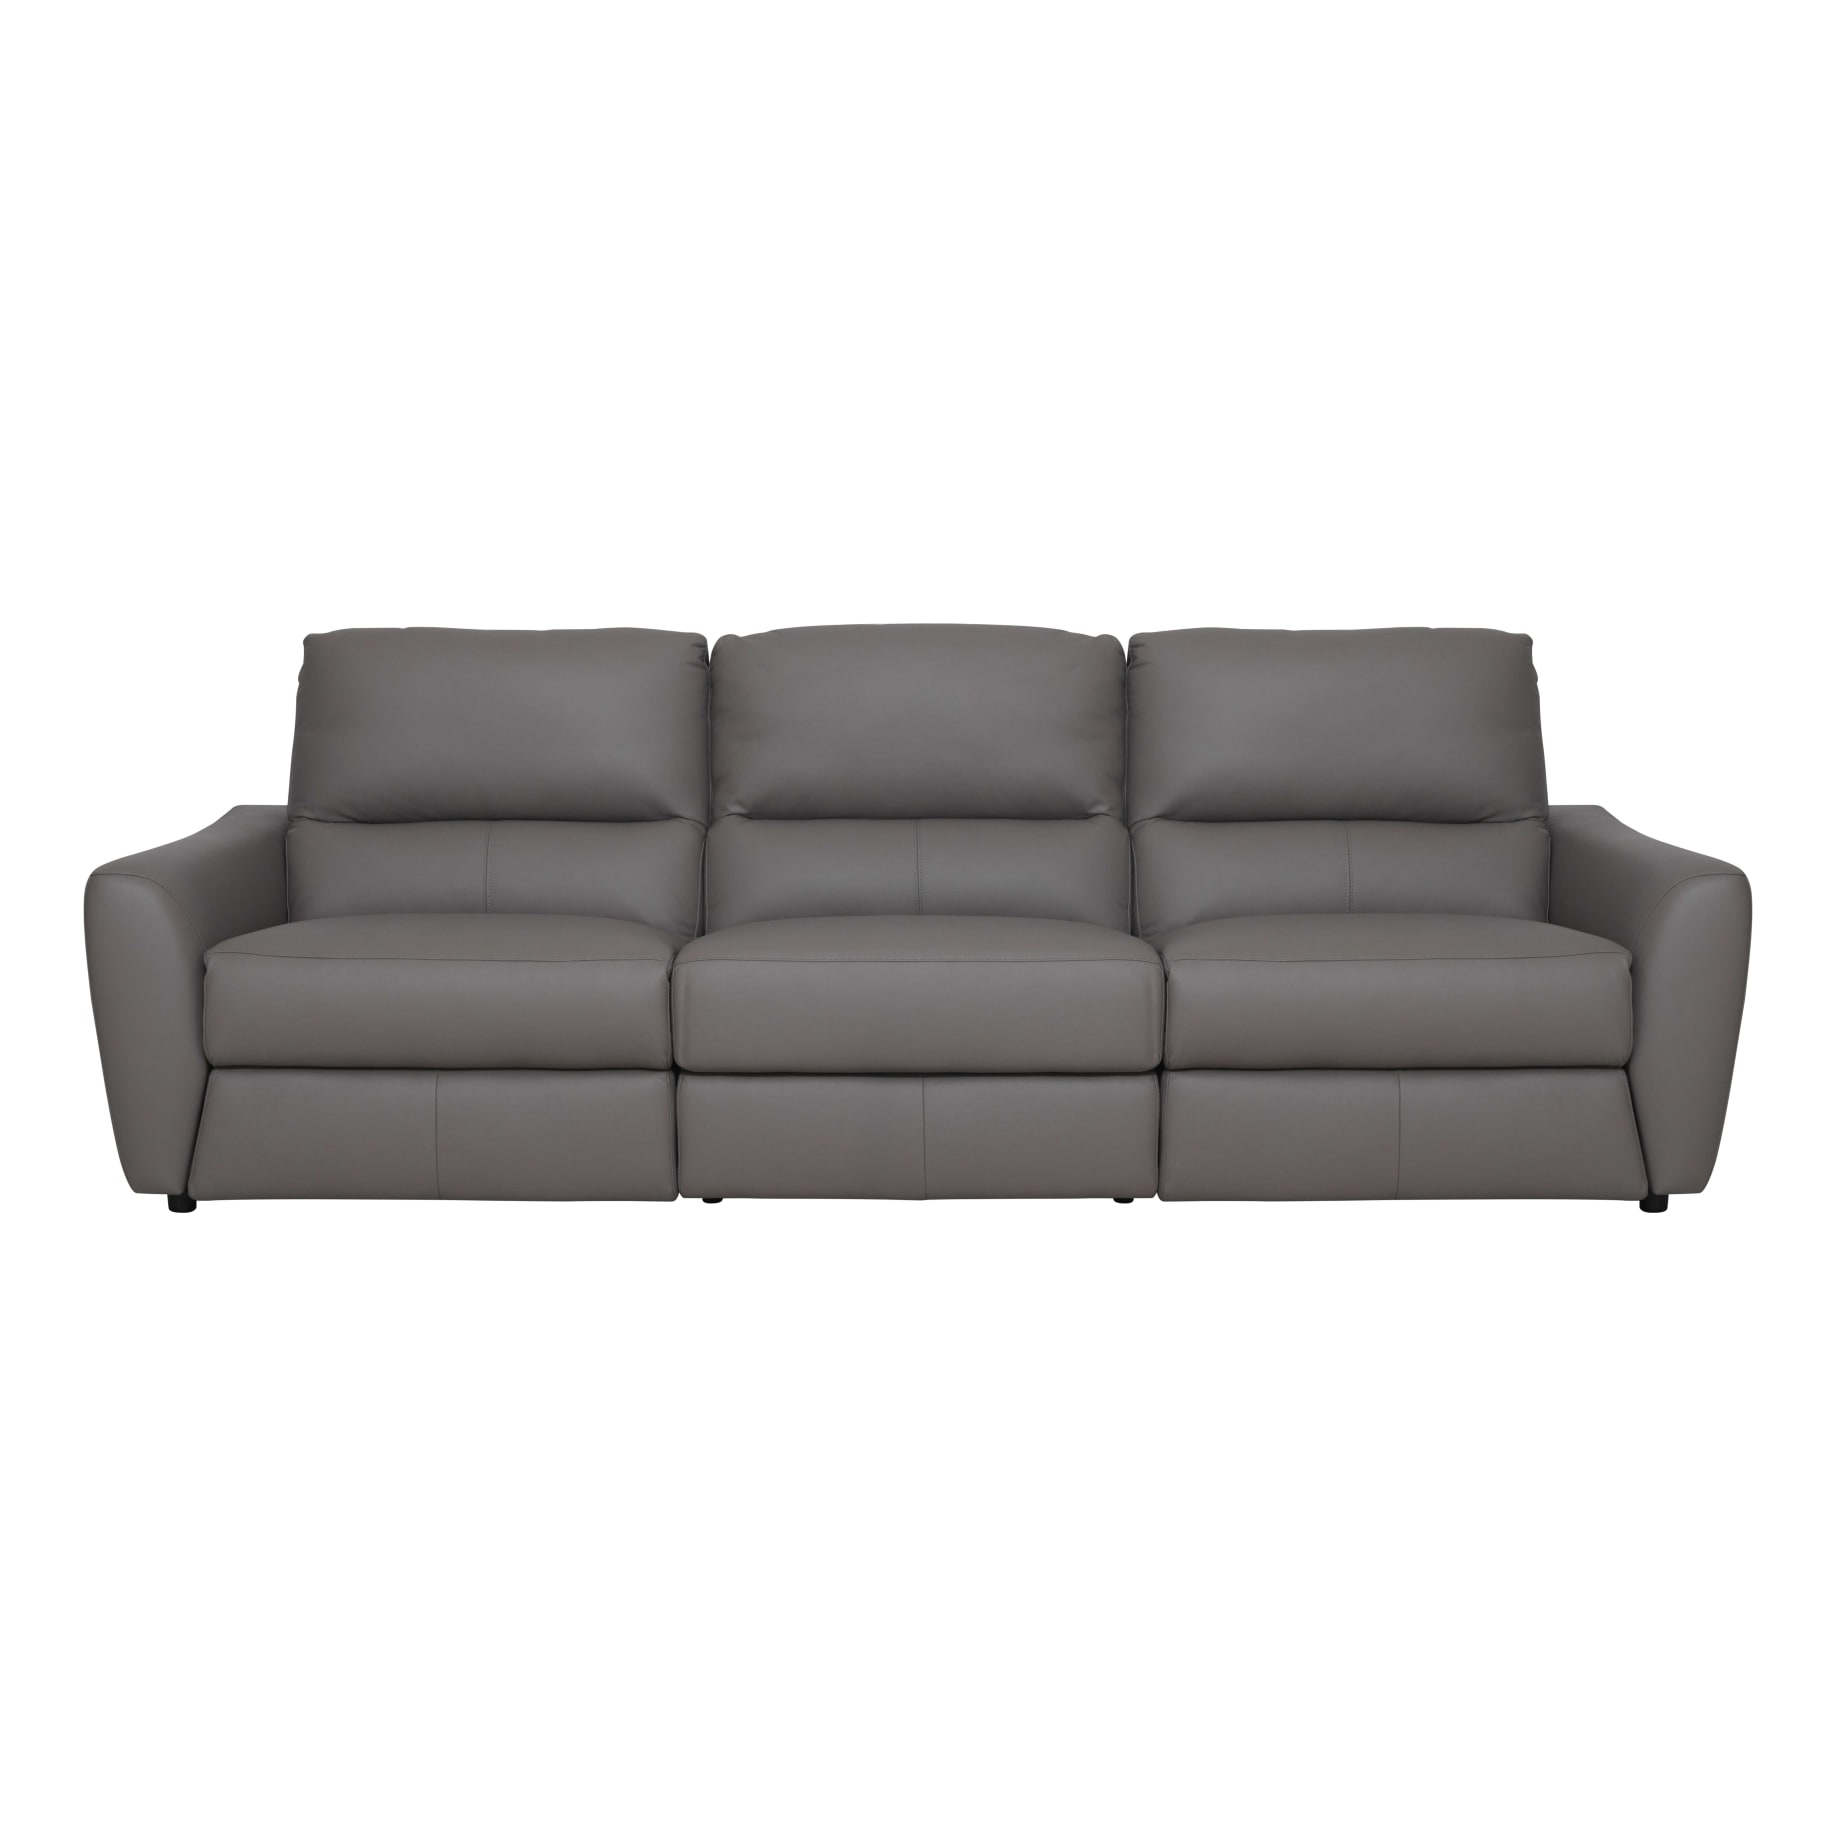 Portland 3 Seater with 2 Recliners in Grey